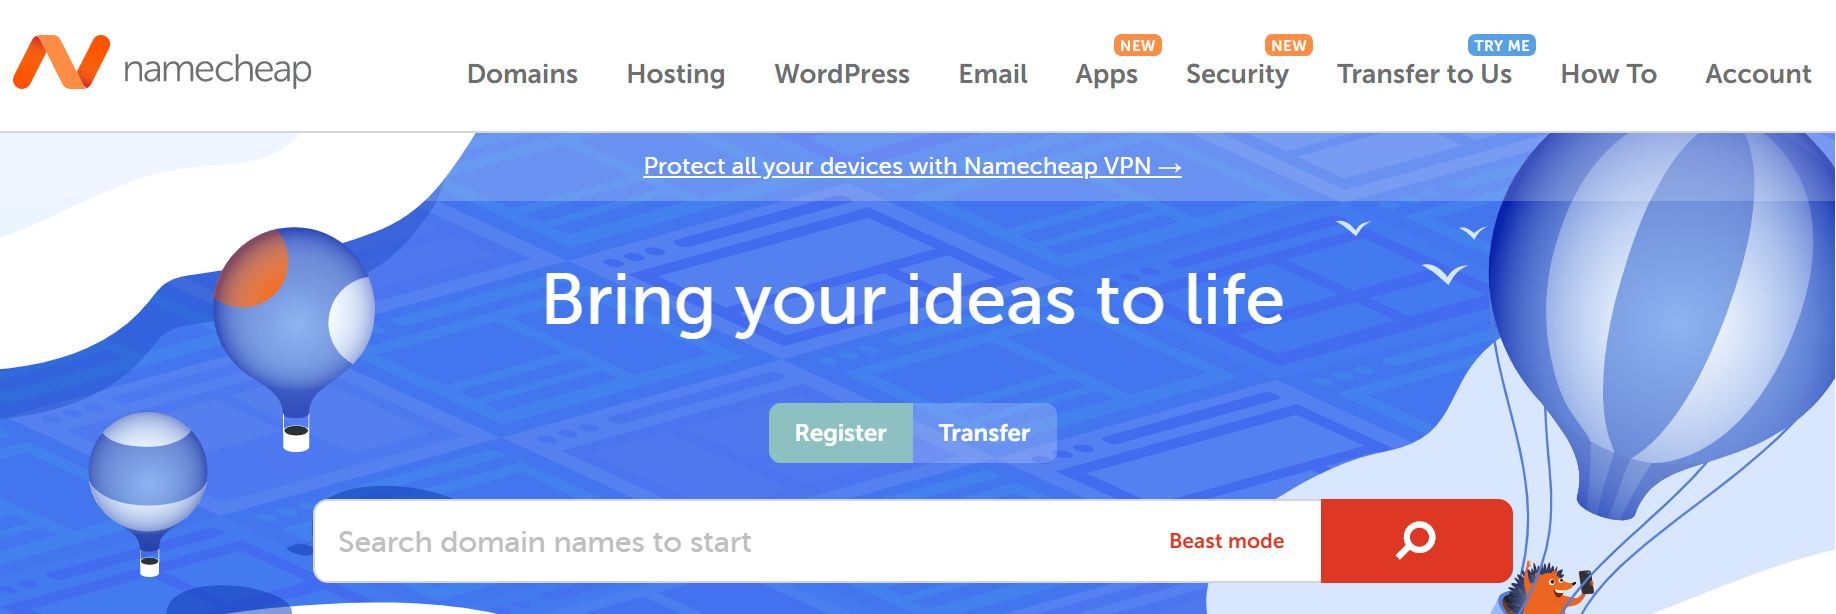 Namecheap are a strong GoDaddy alternative because they offer hosting and domain registration.